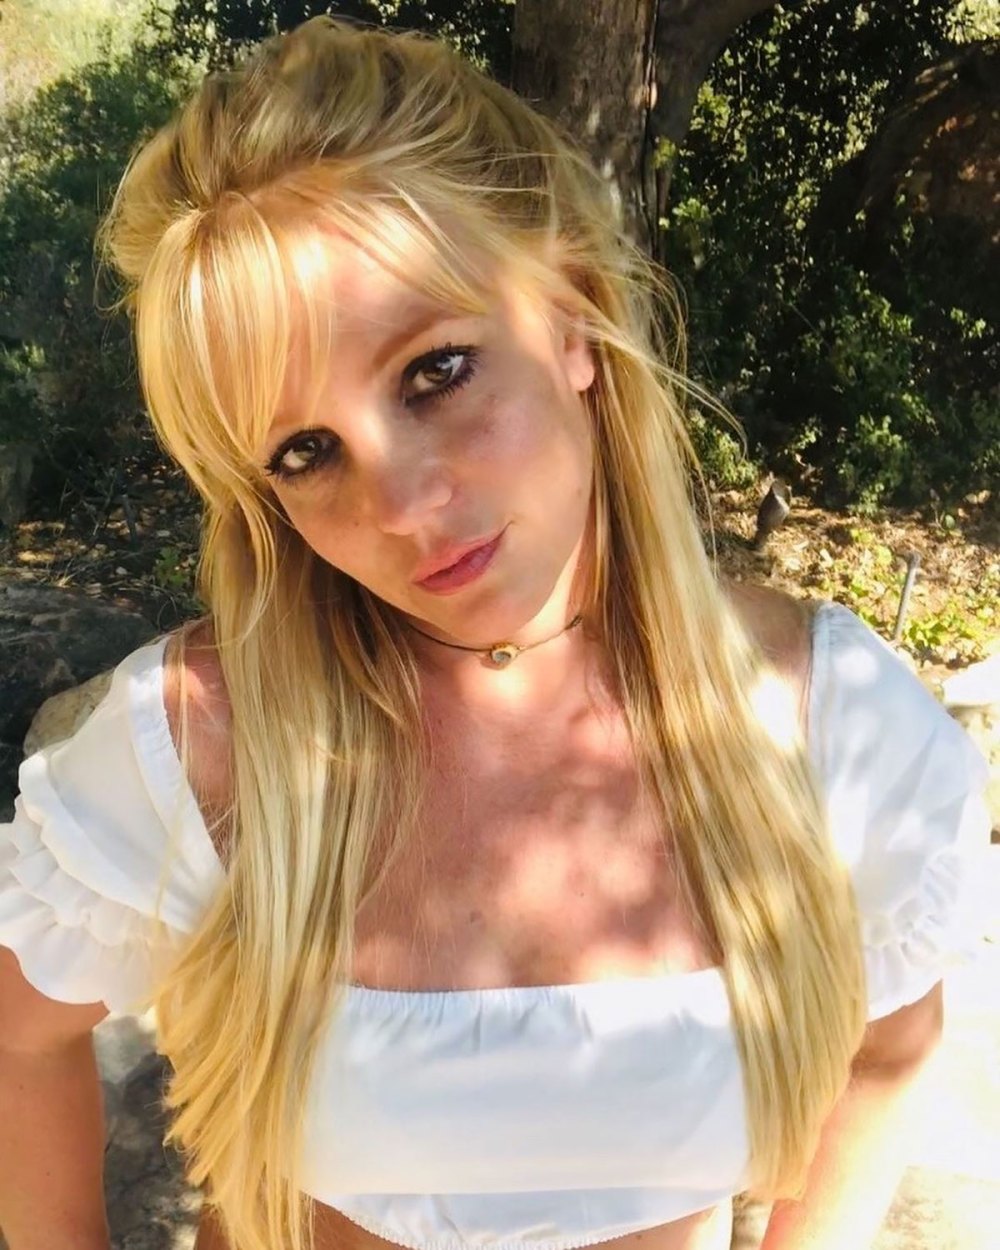 Britney Spears Is Not ‘Leaving Secret Messages’ in Her Instagram Posts, Social Media Manager Says